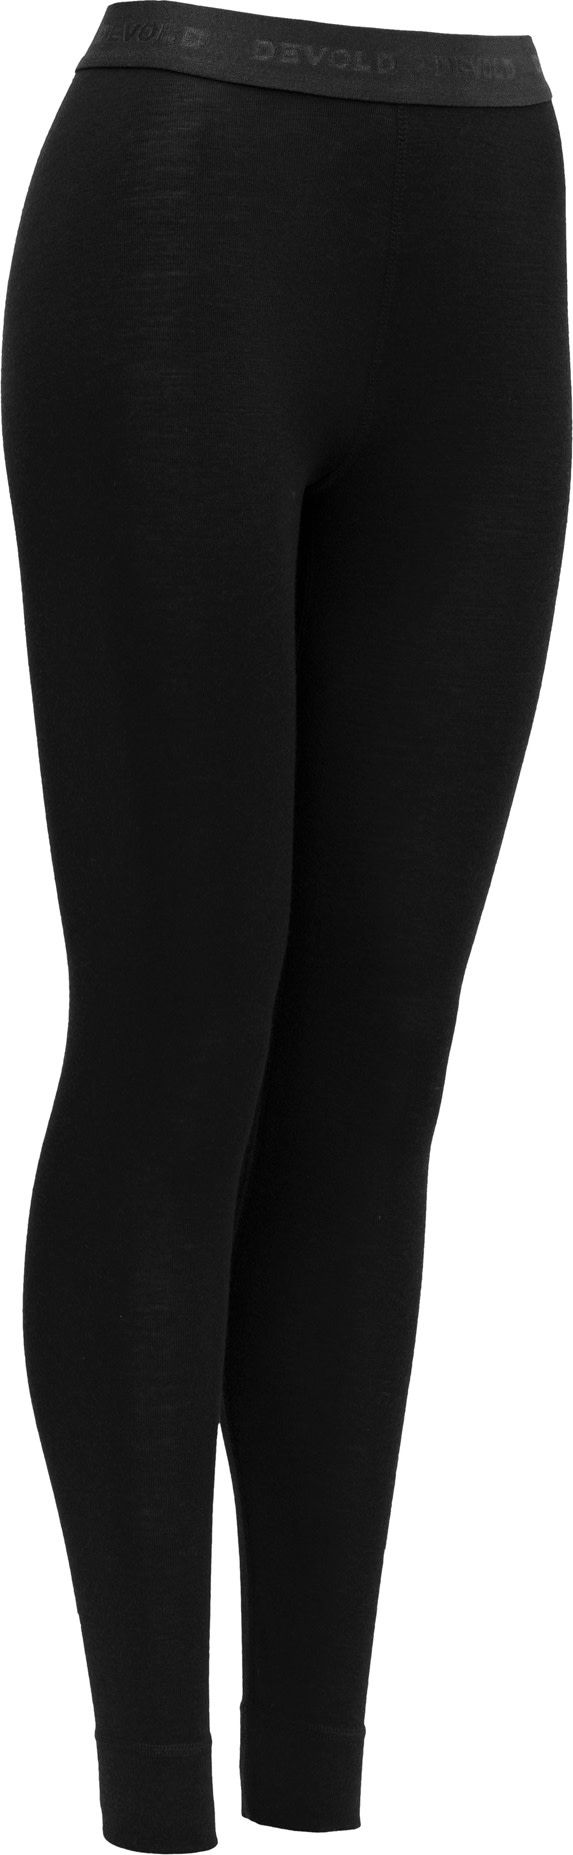 Devold Women's Expedition Long Johns EVENING, Buy Devold Women's  Expedition Long Johns EVENING here